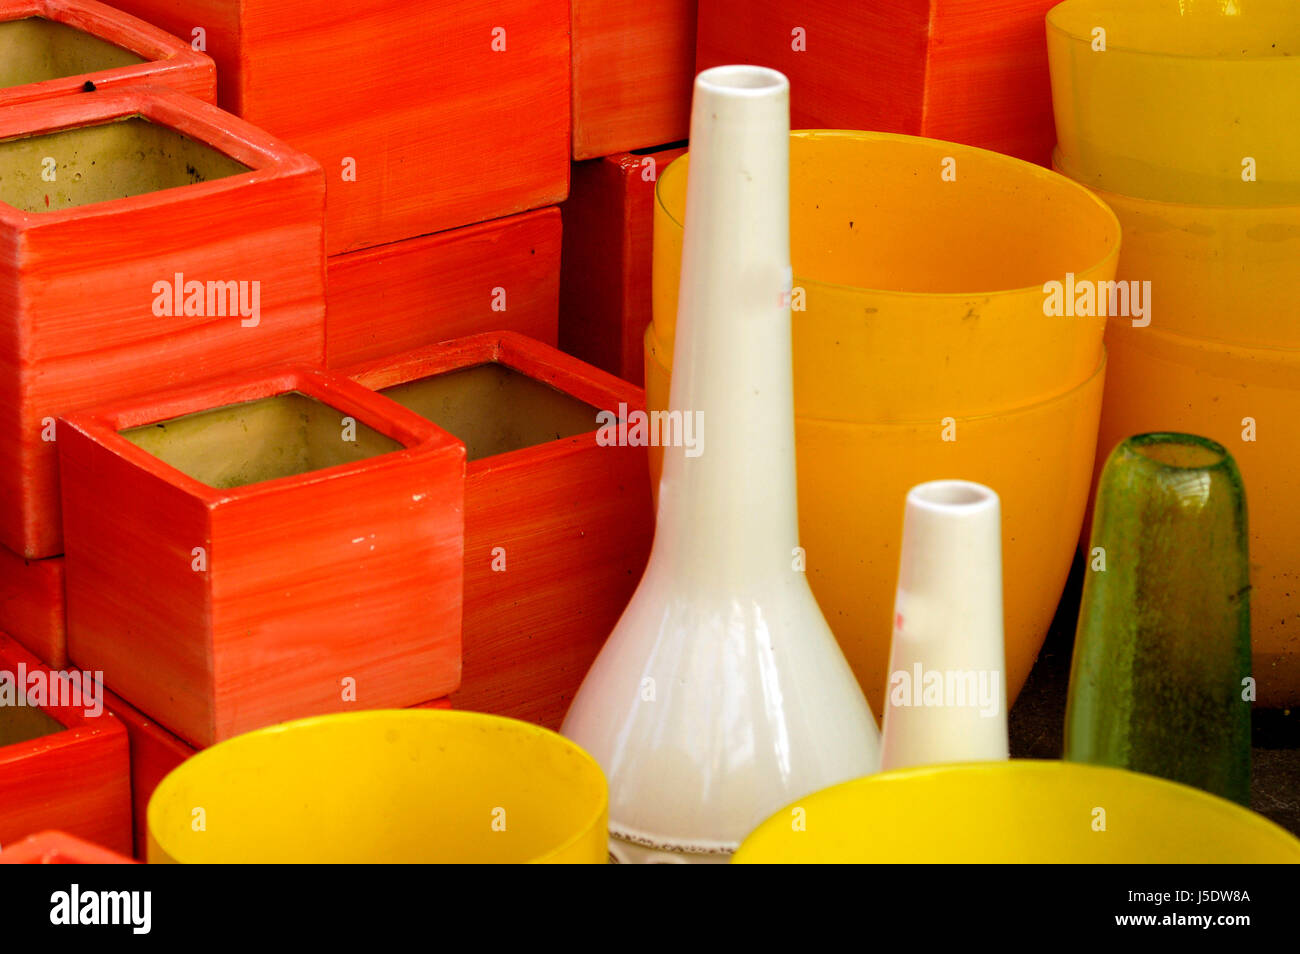 planters in all colors and shapes Stock Photo